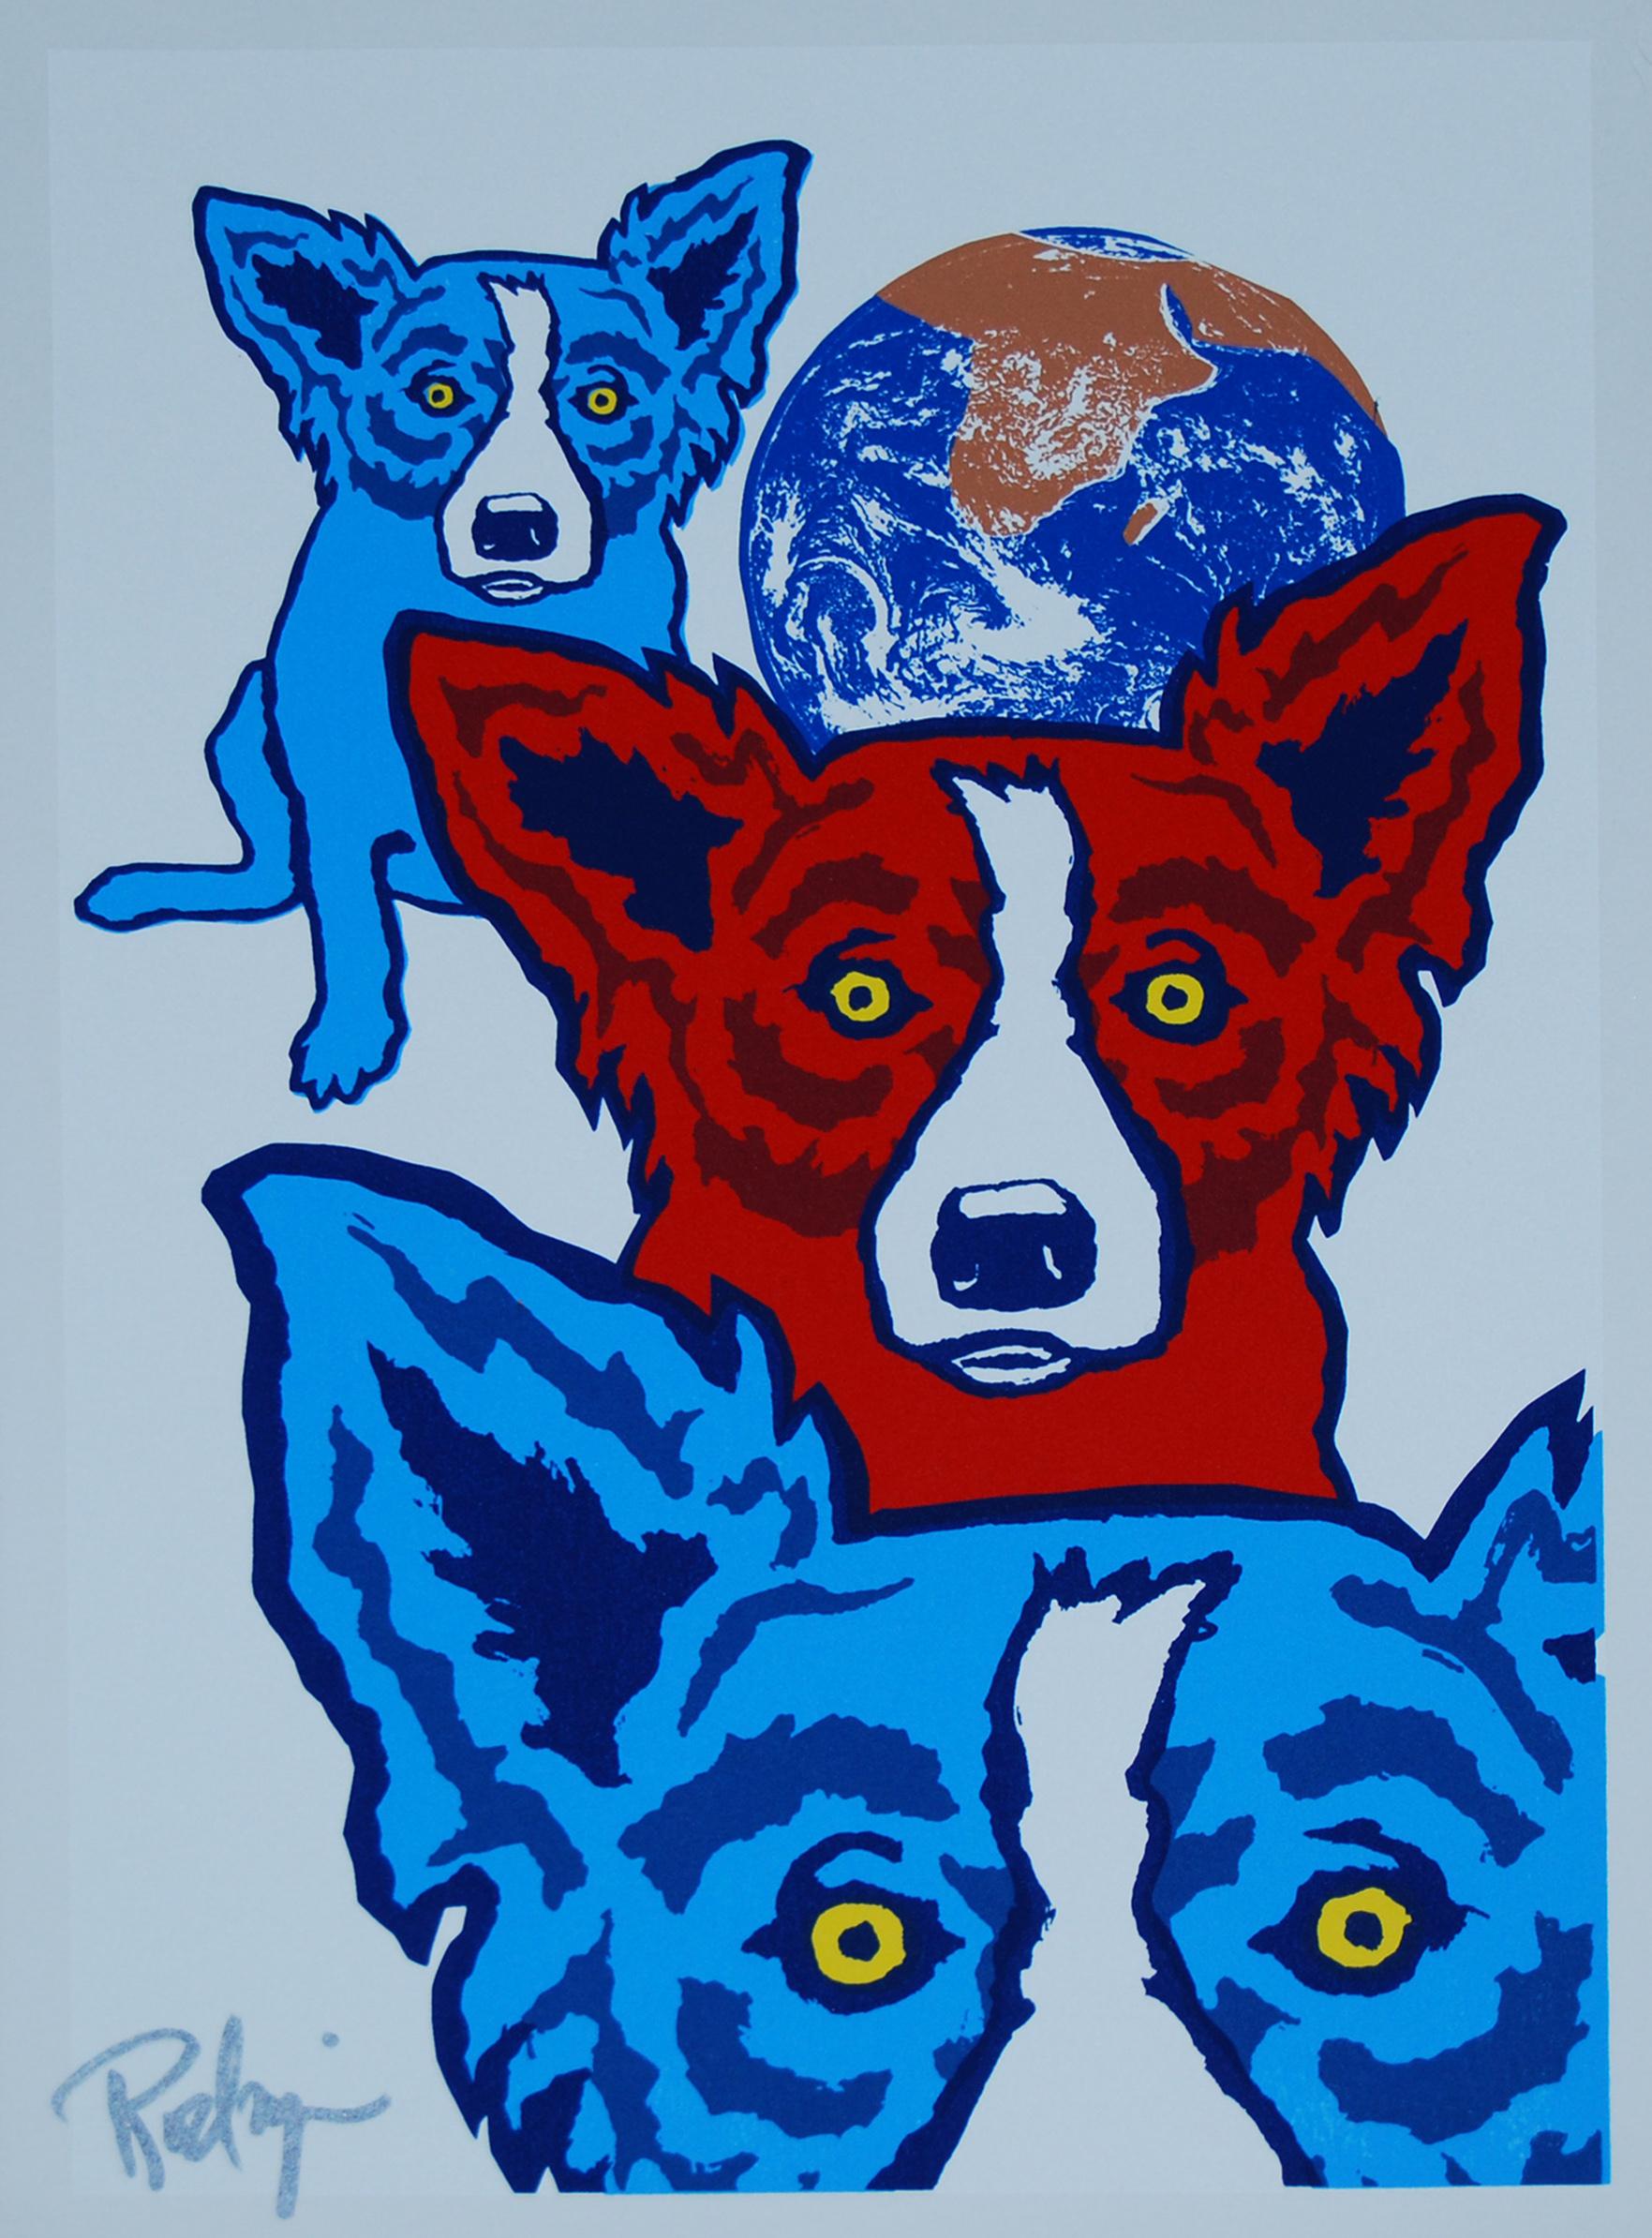 George Rodrigue Animal Print - Between My Good Brothers White - Signed Silkscreen Blue Dog Print